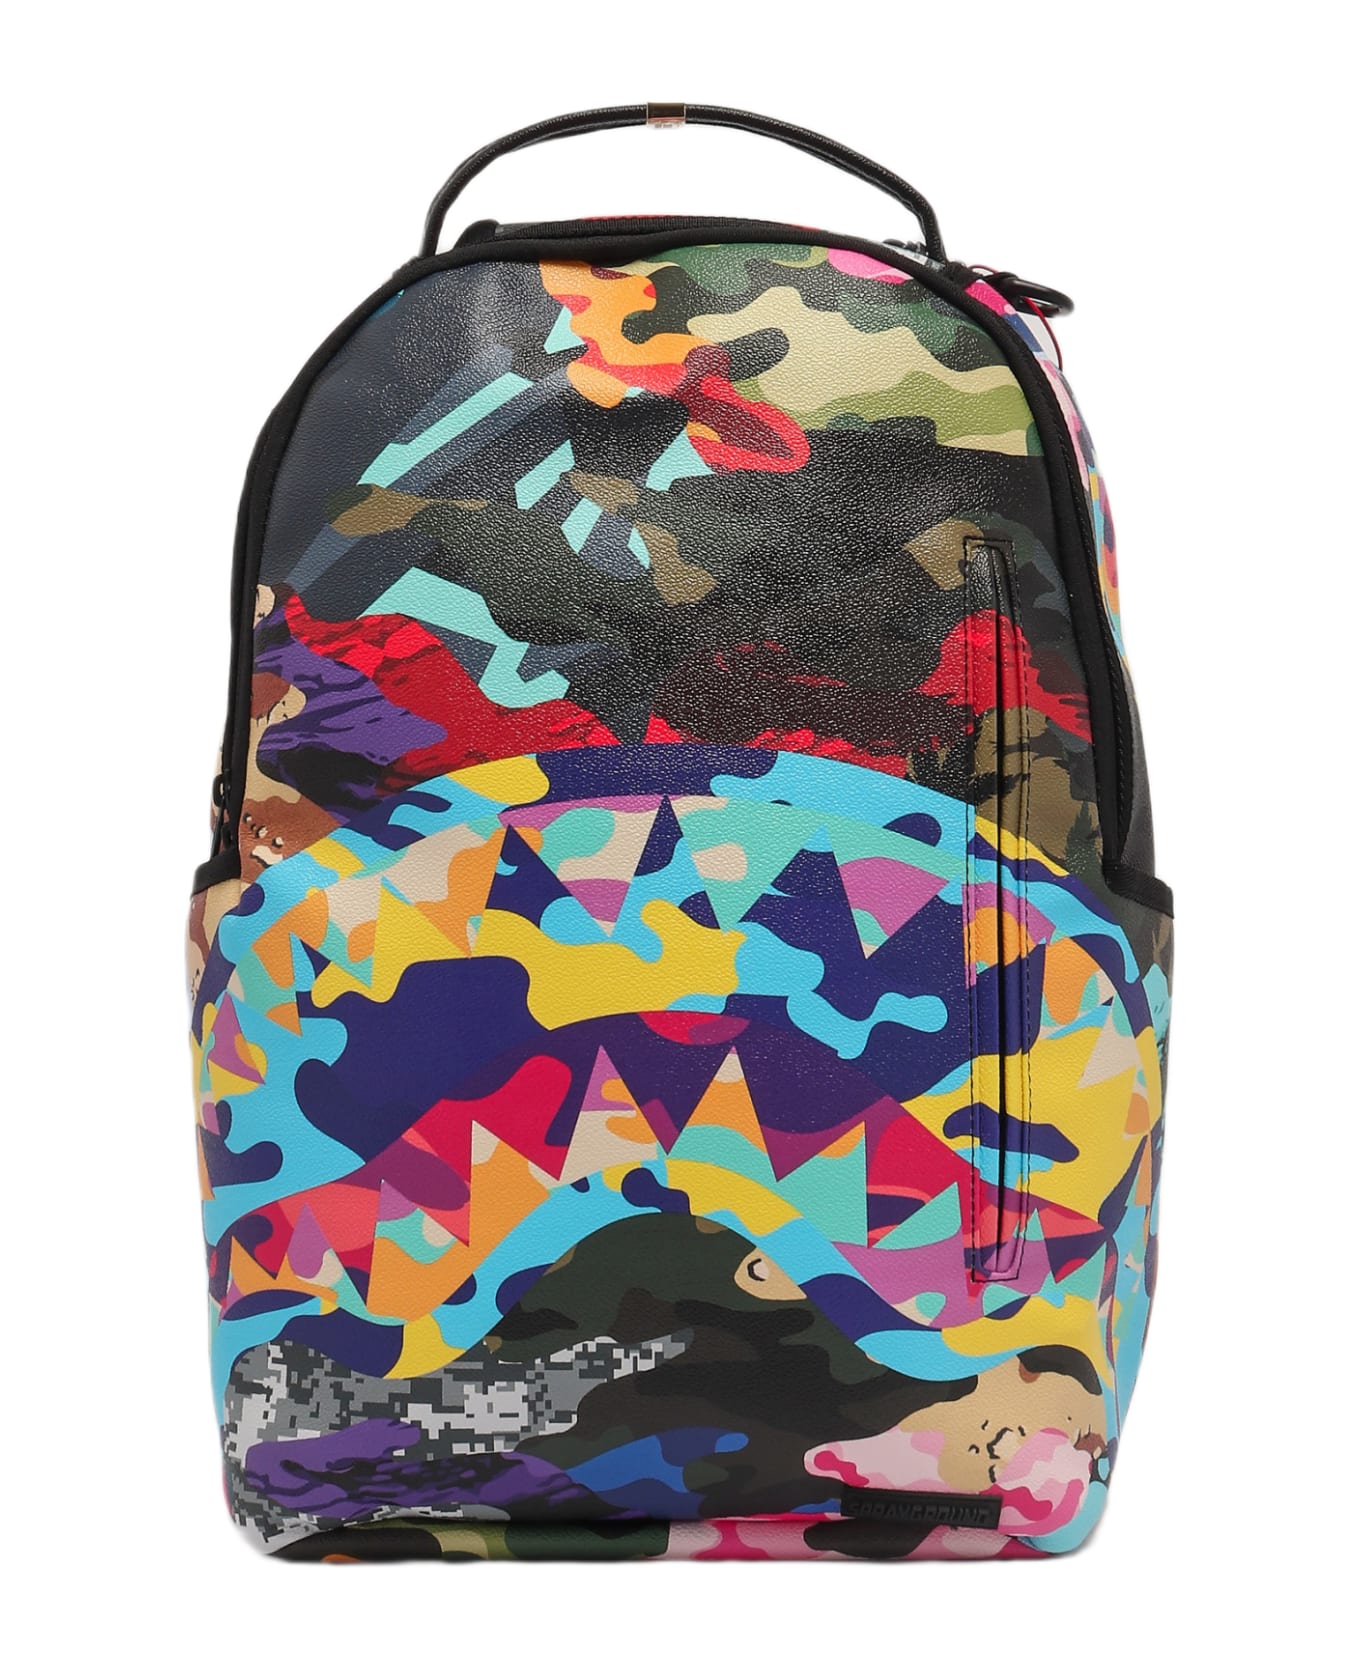 Sprayground Sliced And Diced Camo Backpack - MULTICOLOR アクセサリー＆ギフト